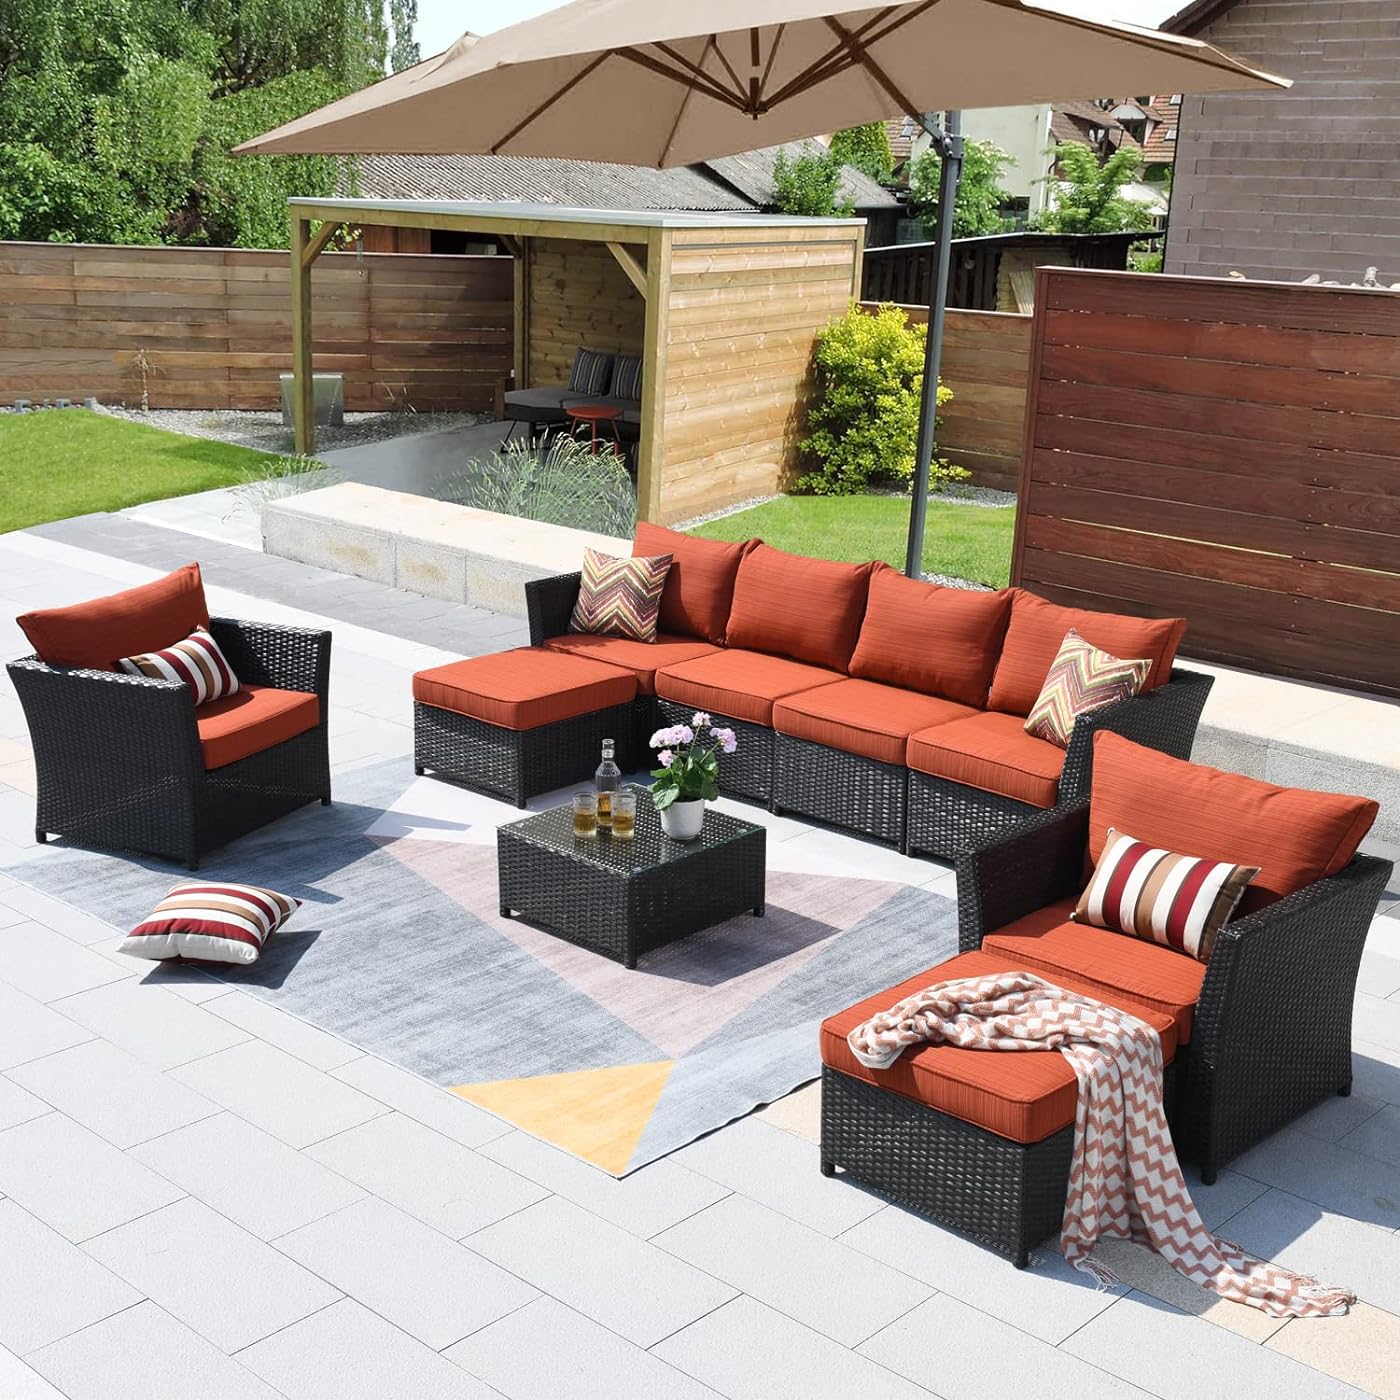 How To Protect Your Outdoor Patio Furniture for Each Season